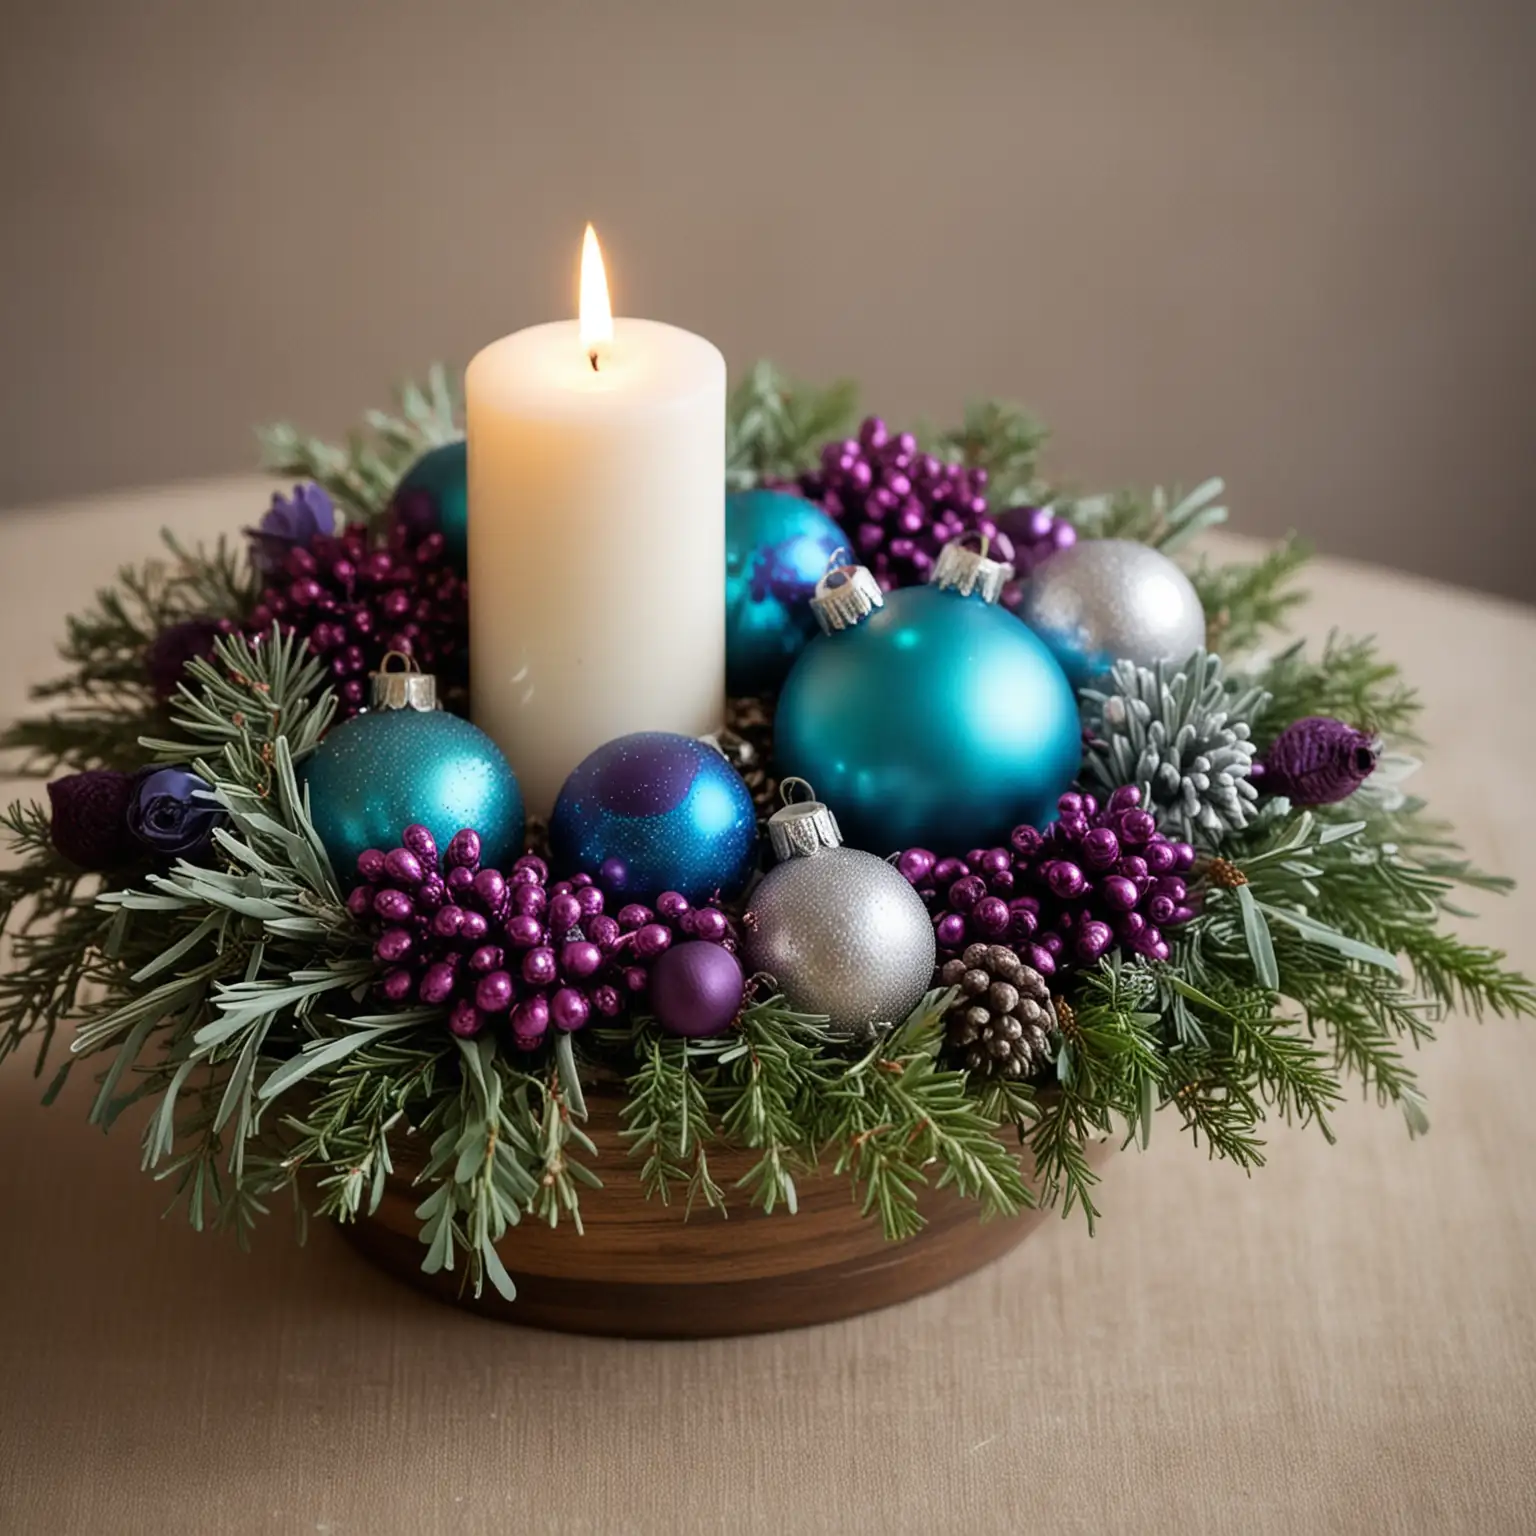 Simple-Boho-Winter-Wedding-Centerpiece-with-Turquoise-and-Purple-Accents-and-Ornaments